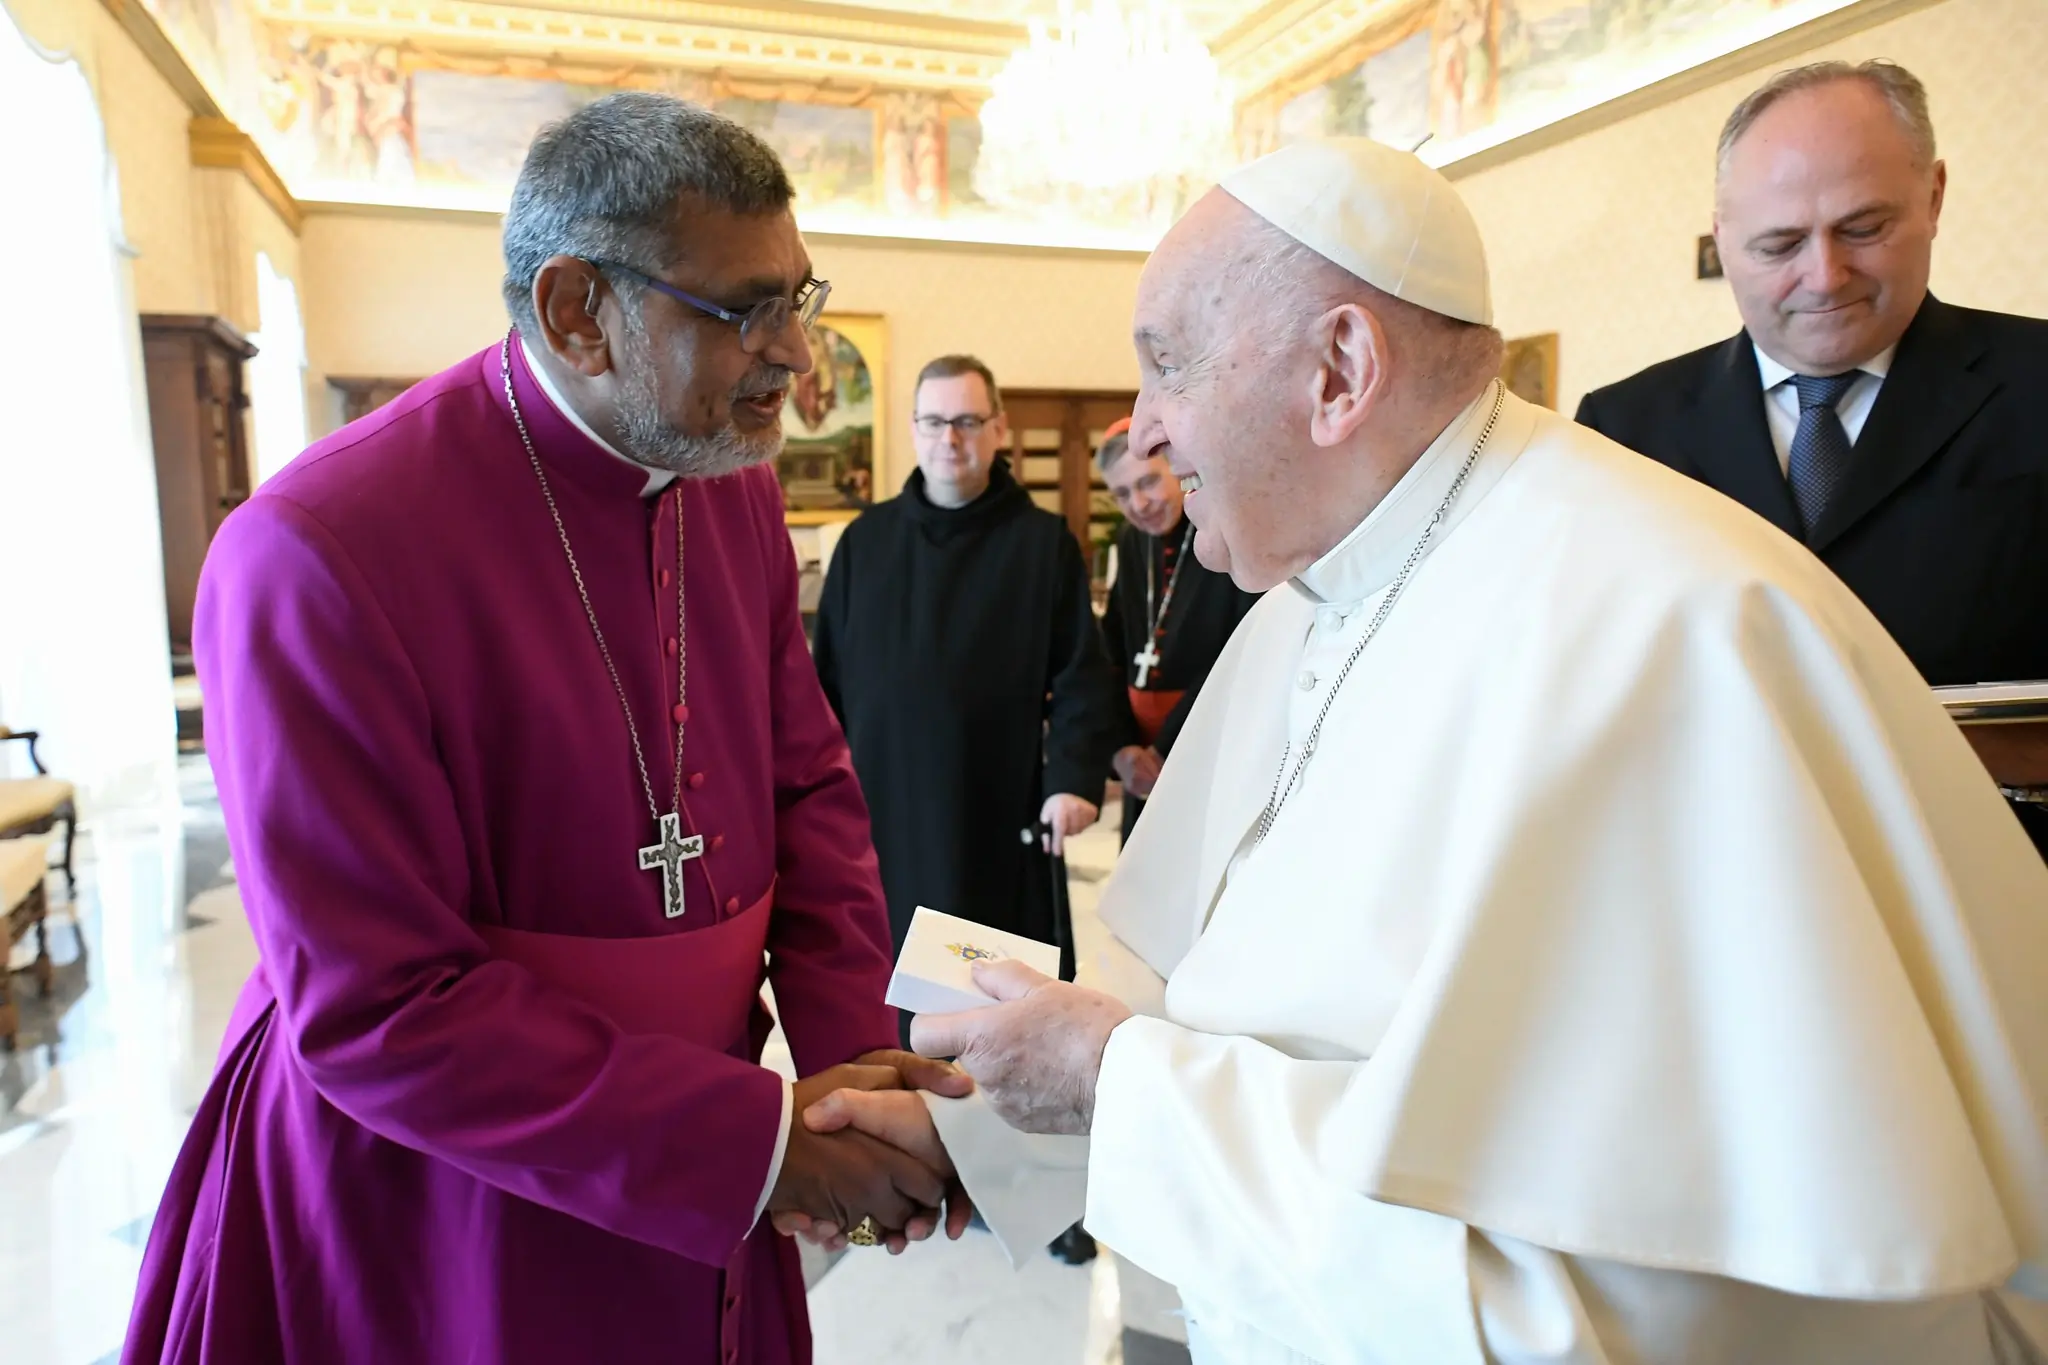 Archbishop Ian Ernest, director of the Anglican Centre in Rome, greets Pope Francis during the visit of Archbishop Stephen Cottrell, Archbishop of York, to the Apostolic Palace